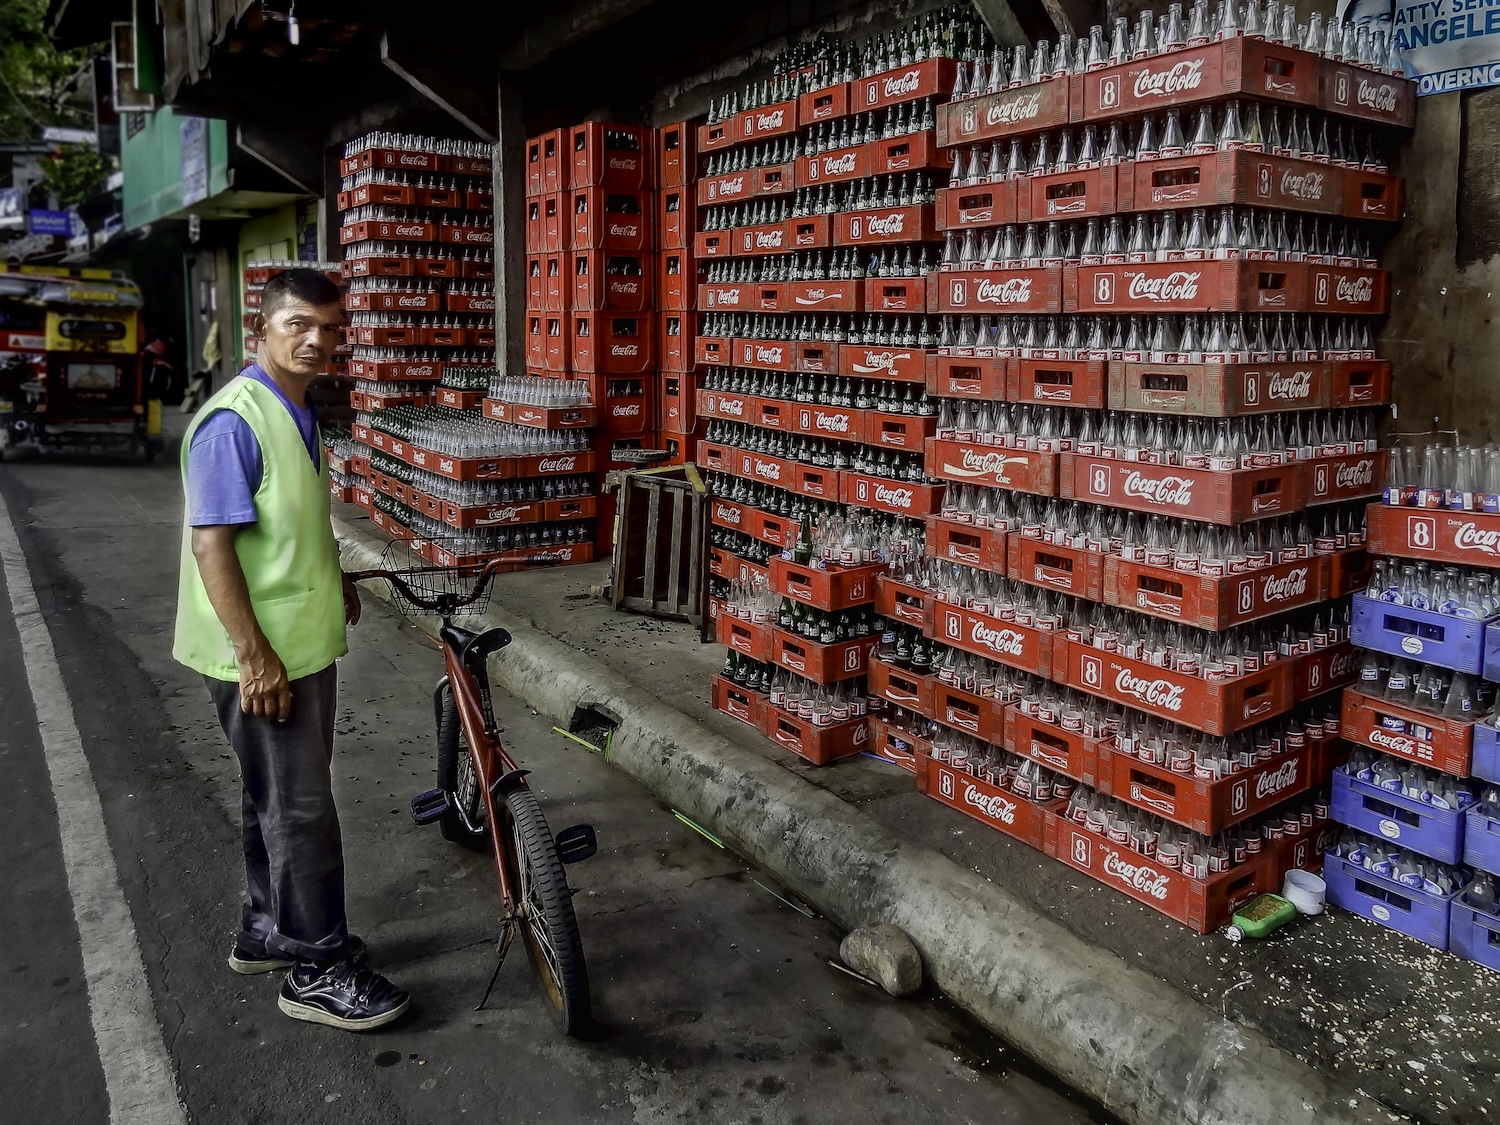 Refillable packaging - worker prepares to move empty refillable glass coca-cola bottles in the philippines